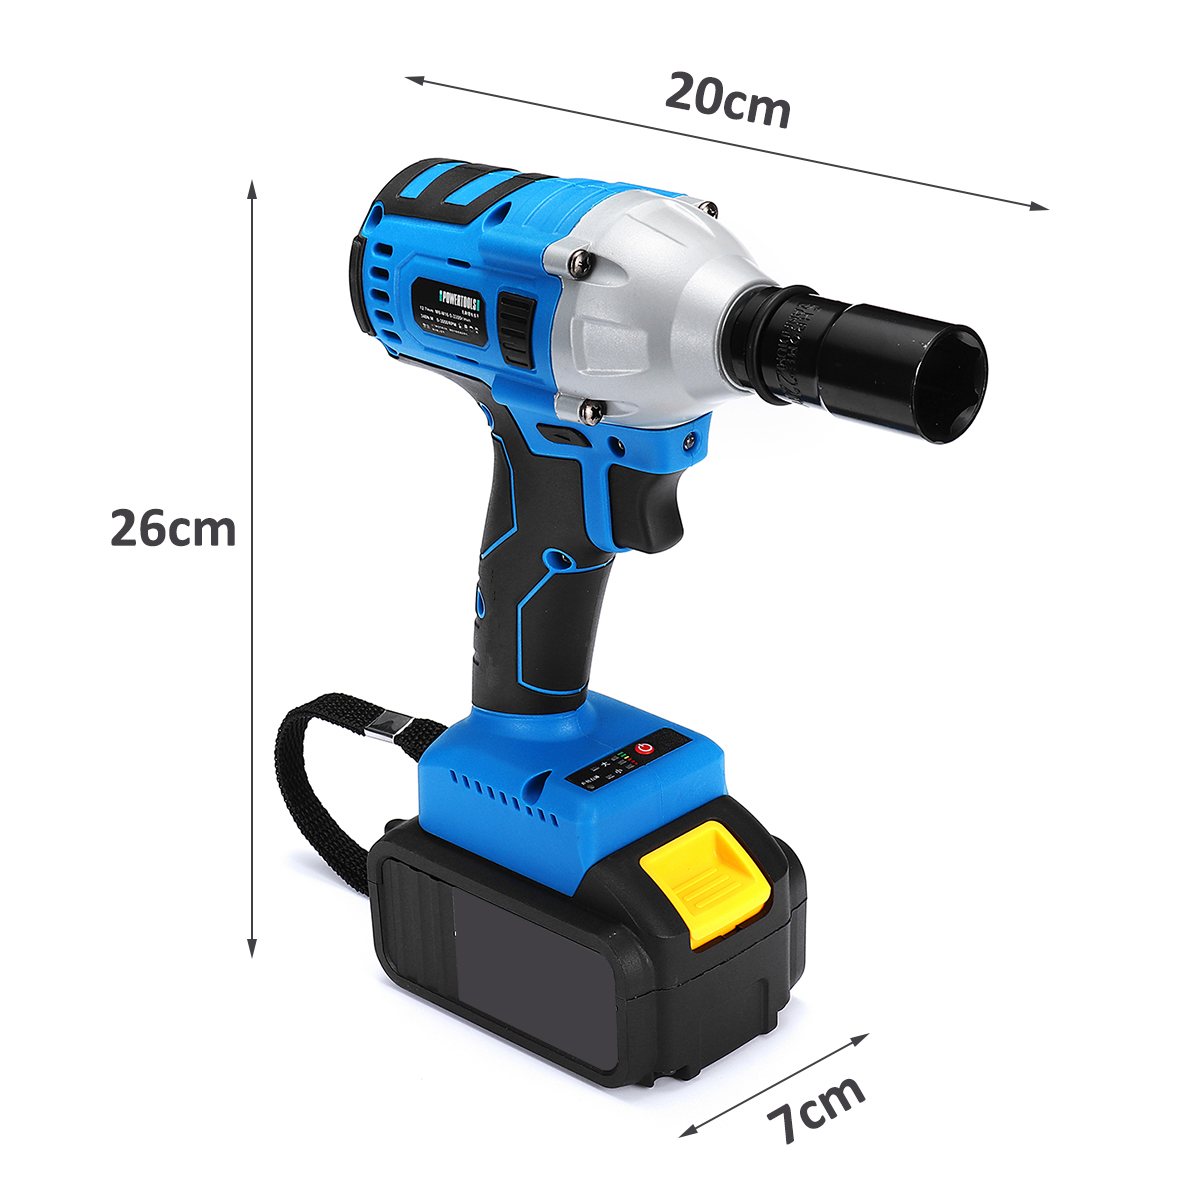 15000-30000mAH-Cordless-Impact-Wrench-Brushless-Electric-Wrench-12-Socket-Tool-1369004-5